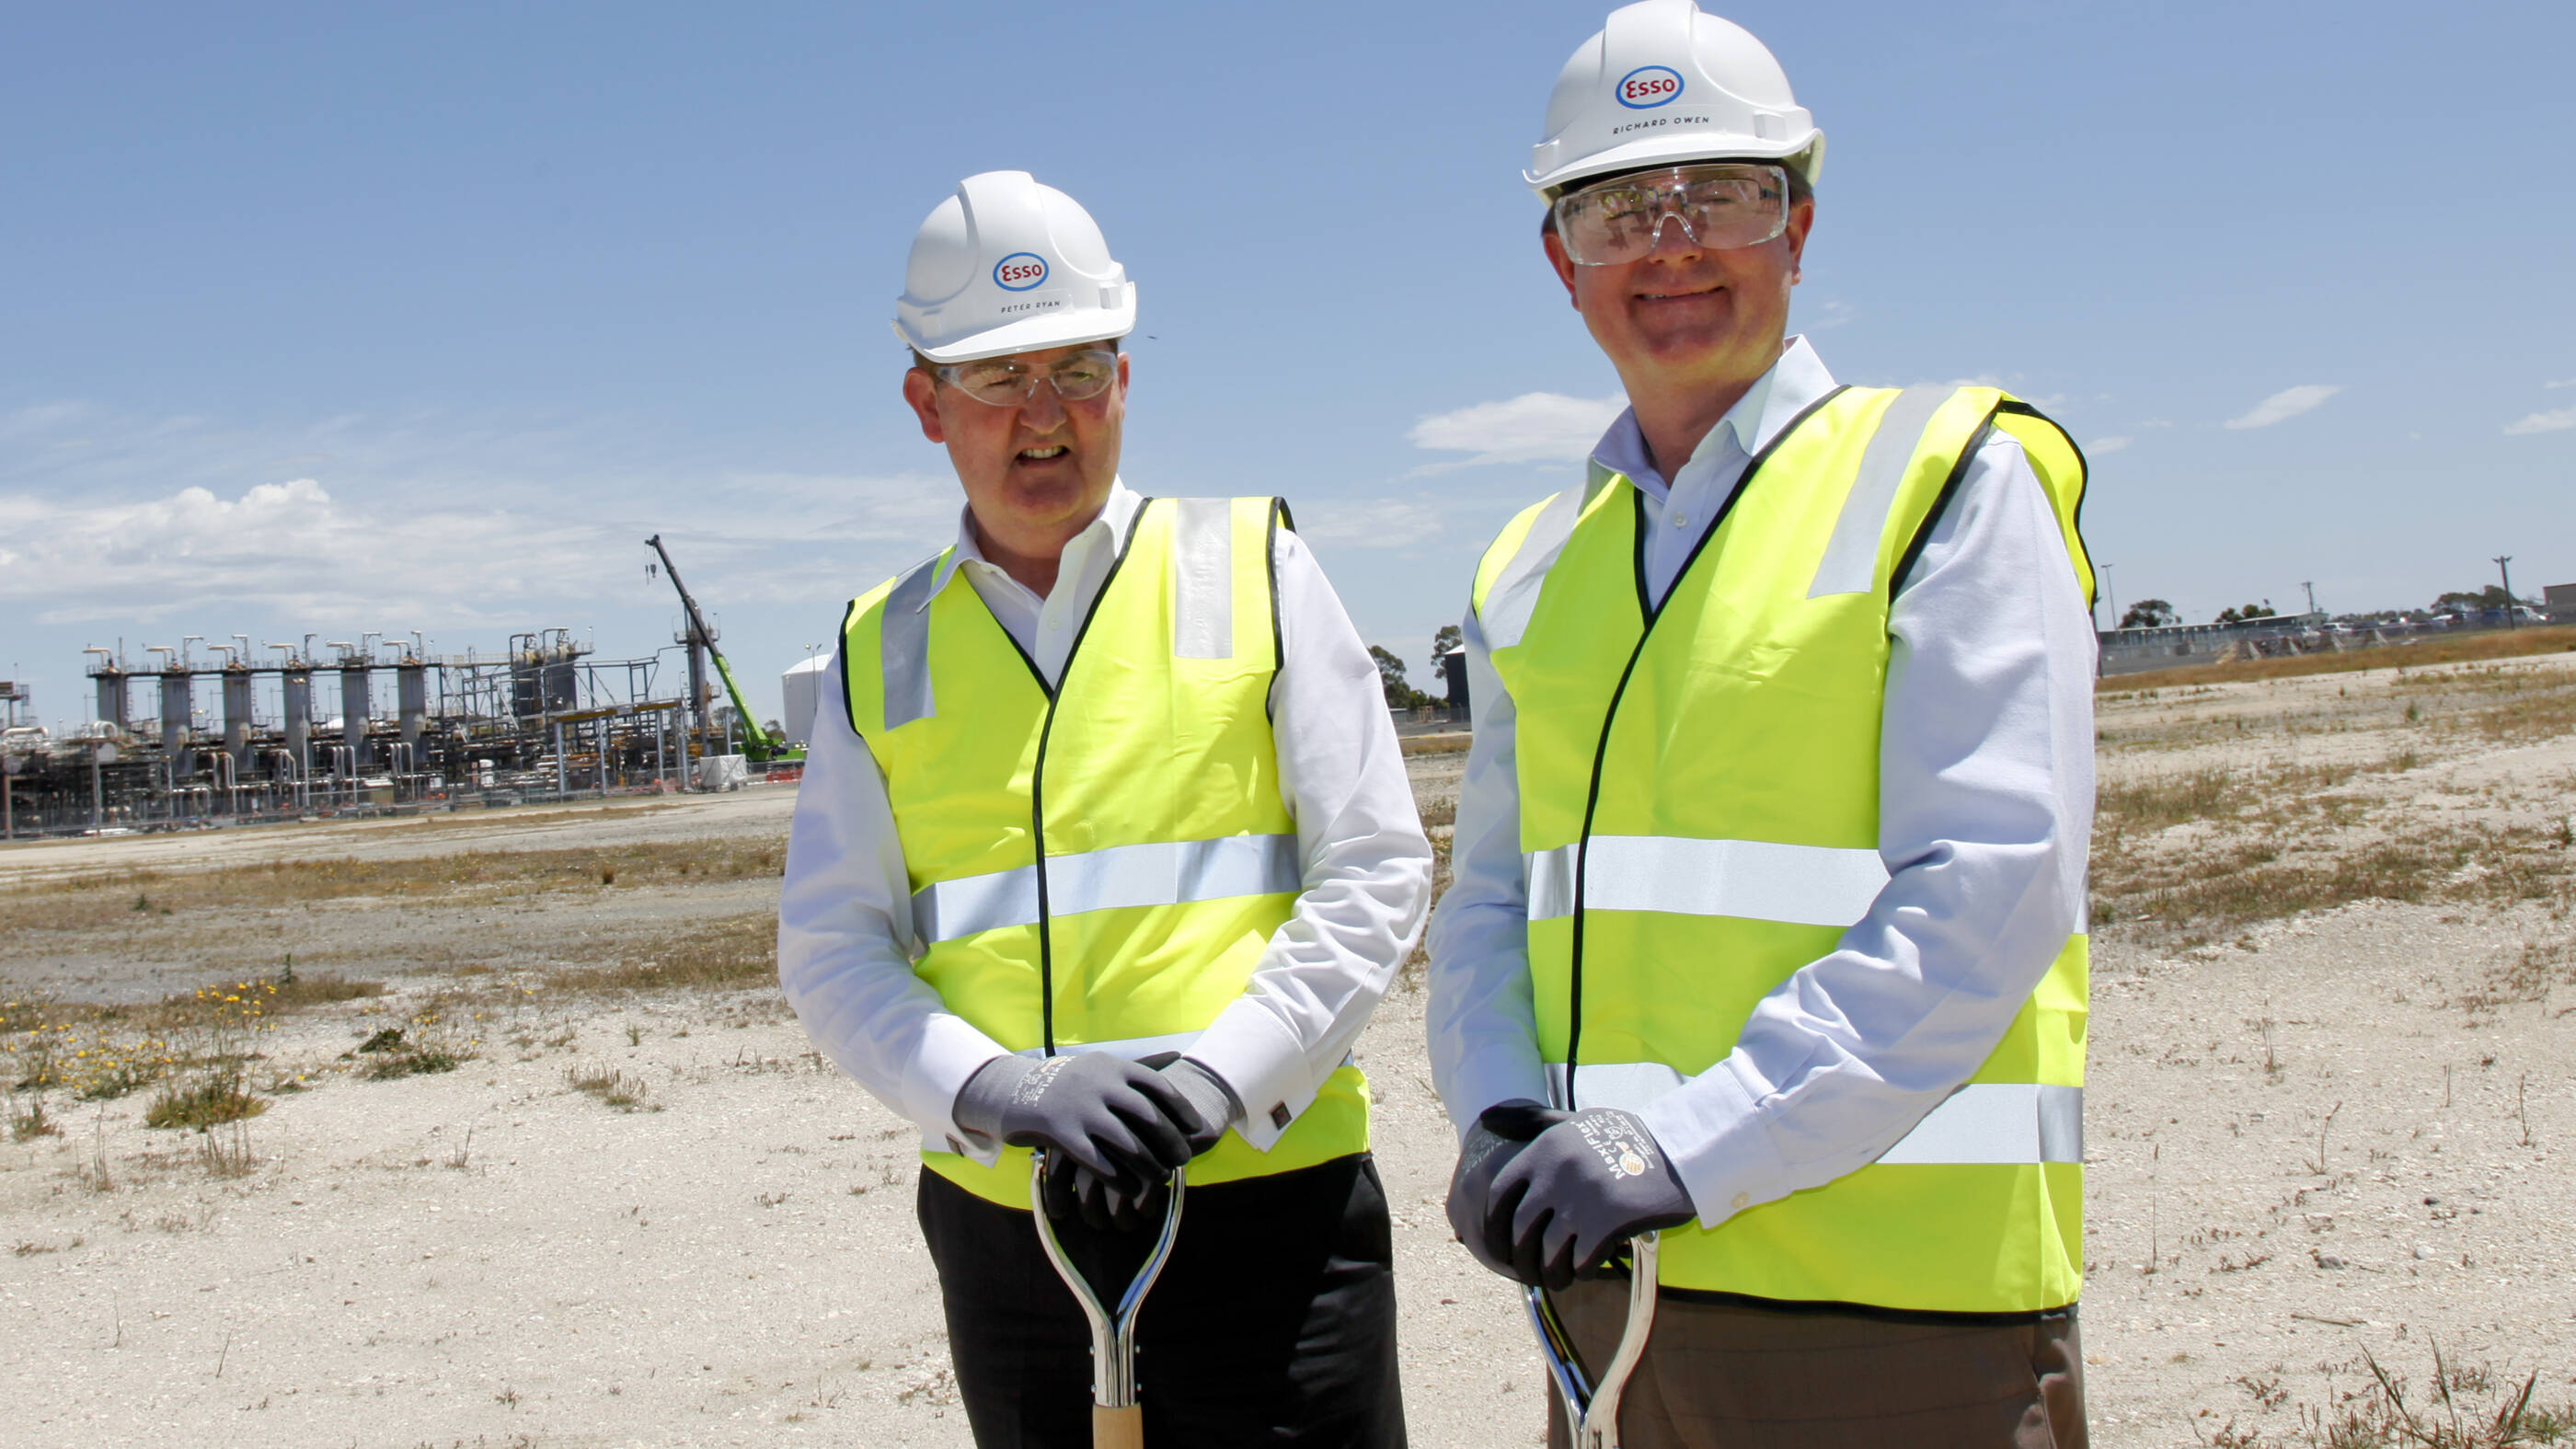 Richard, right, at the groundbreaking for the Longford Gas Conditioning Plant in 2013